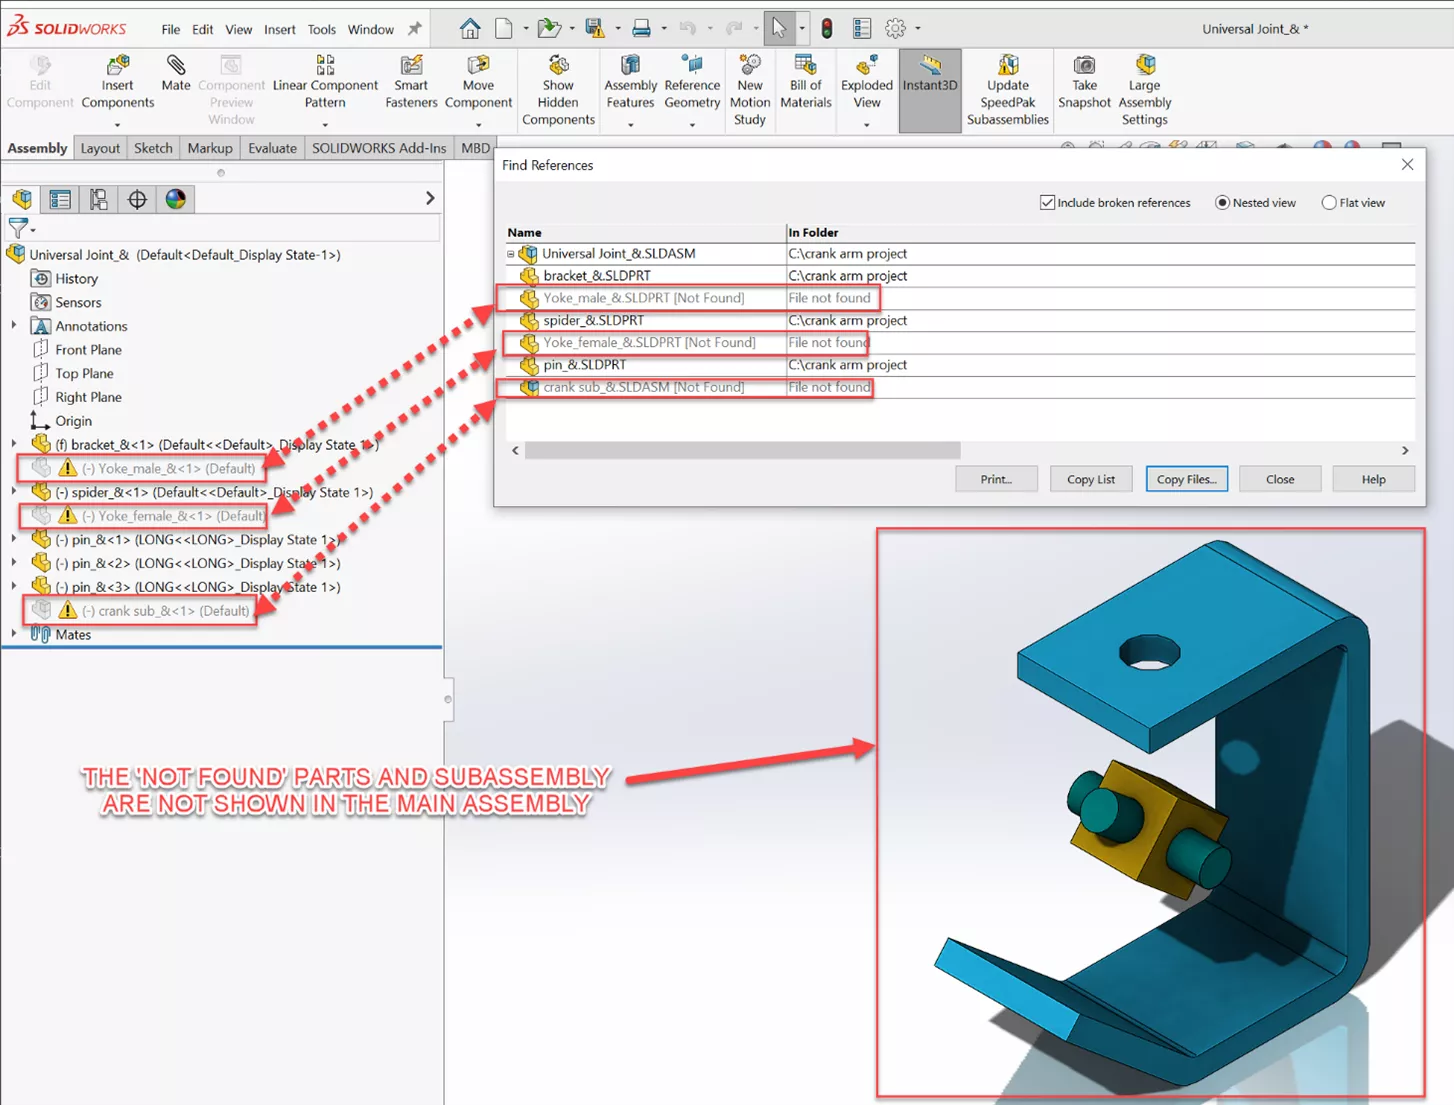 Repair References in SOLIDWORKS Assemblies